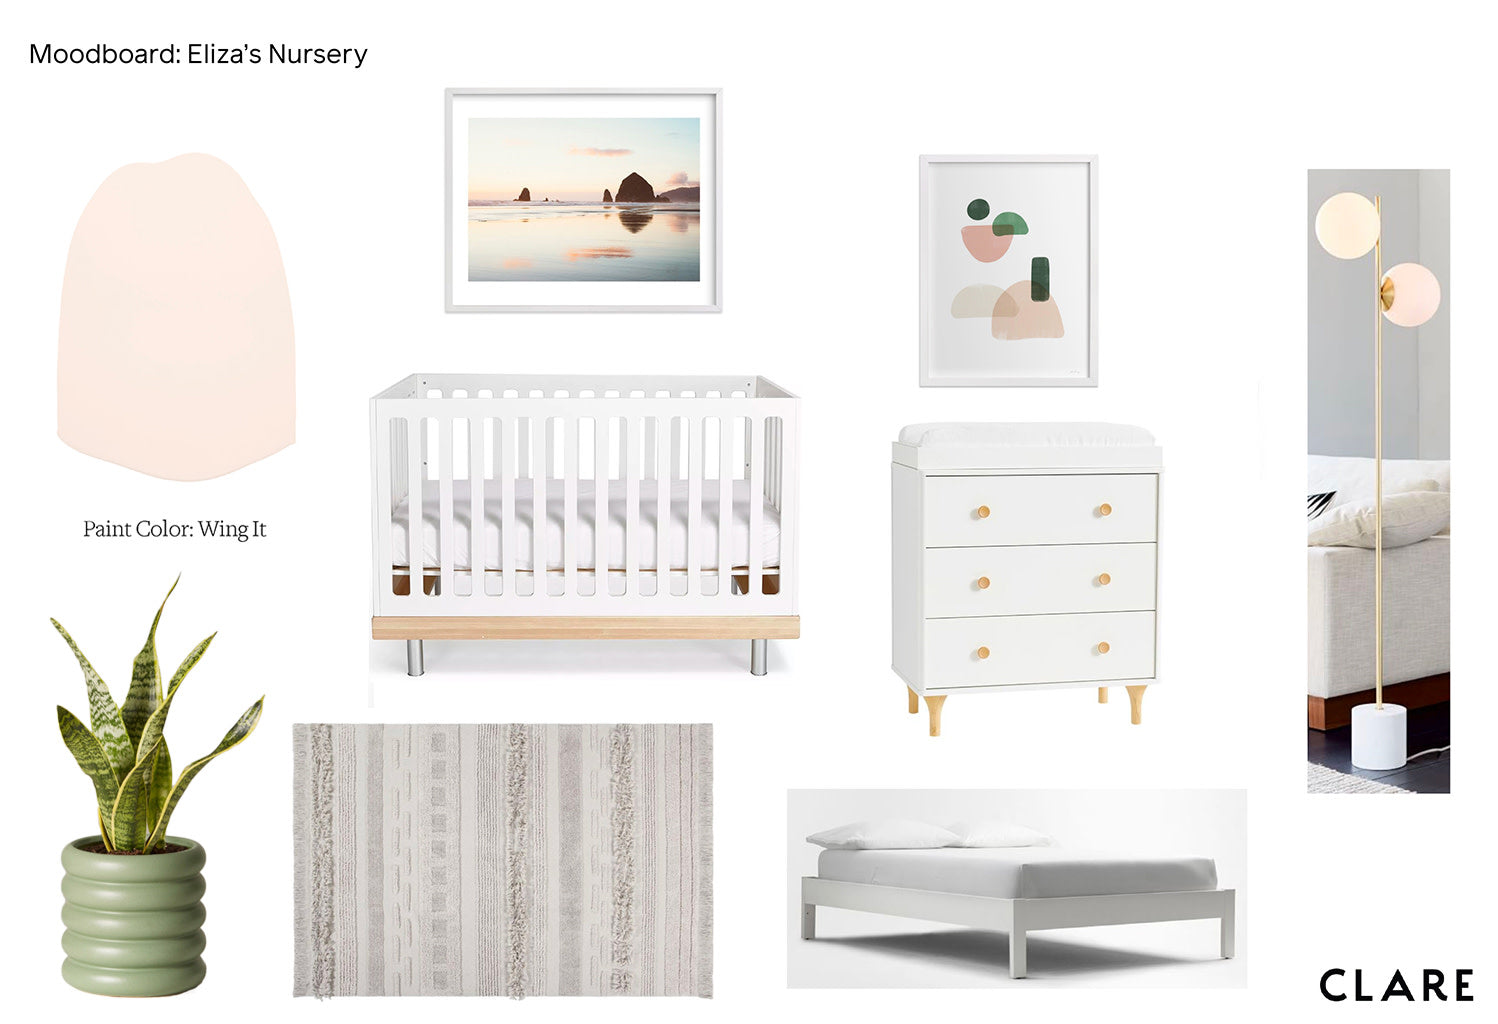 See the before and after photos of Eliza Blank's nursery makeover, painted in Clare's subtle pink Wing It.